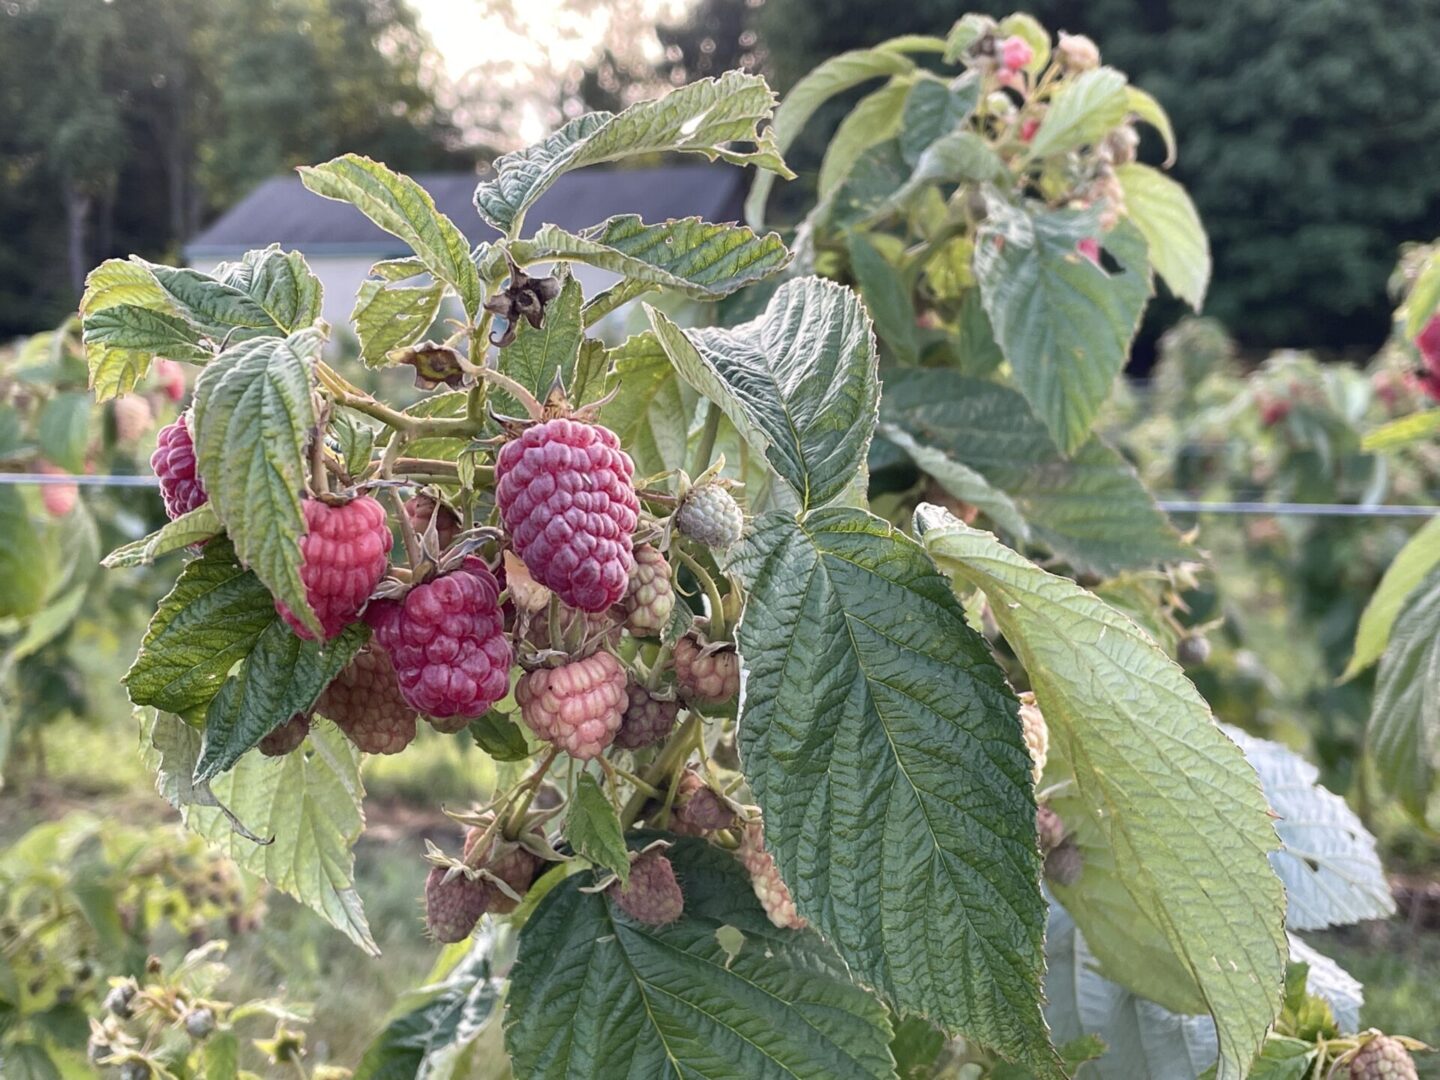 A picture of a berry farm